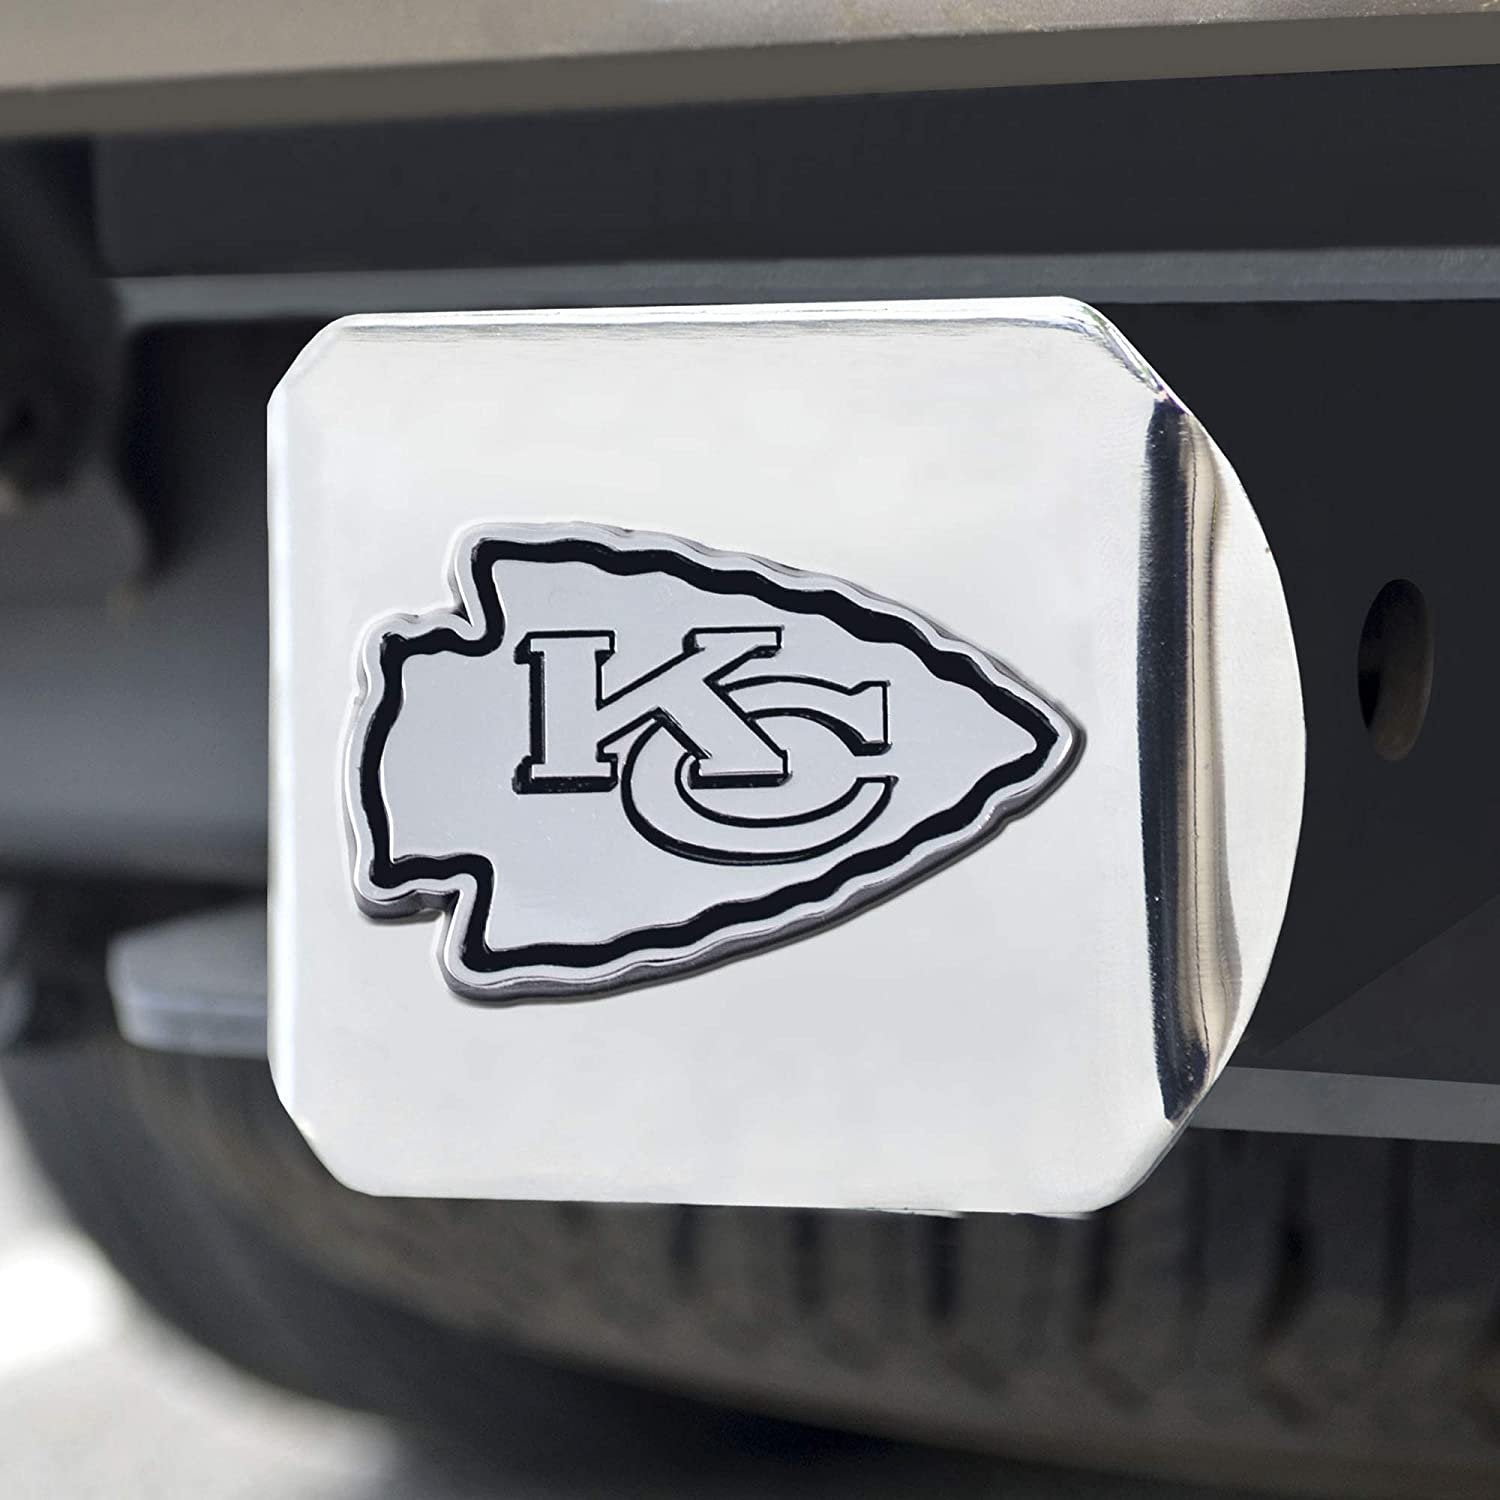 Kansas City Chiefs Hitch Cover Solid Metal with Raised Chrome Metal Emblem 2" Square Type III